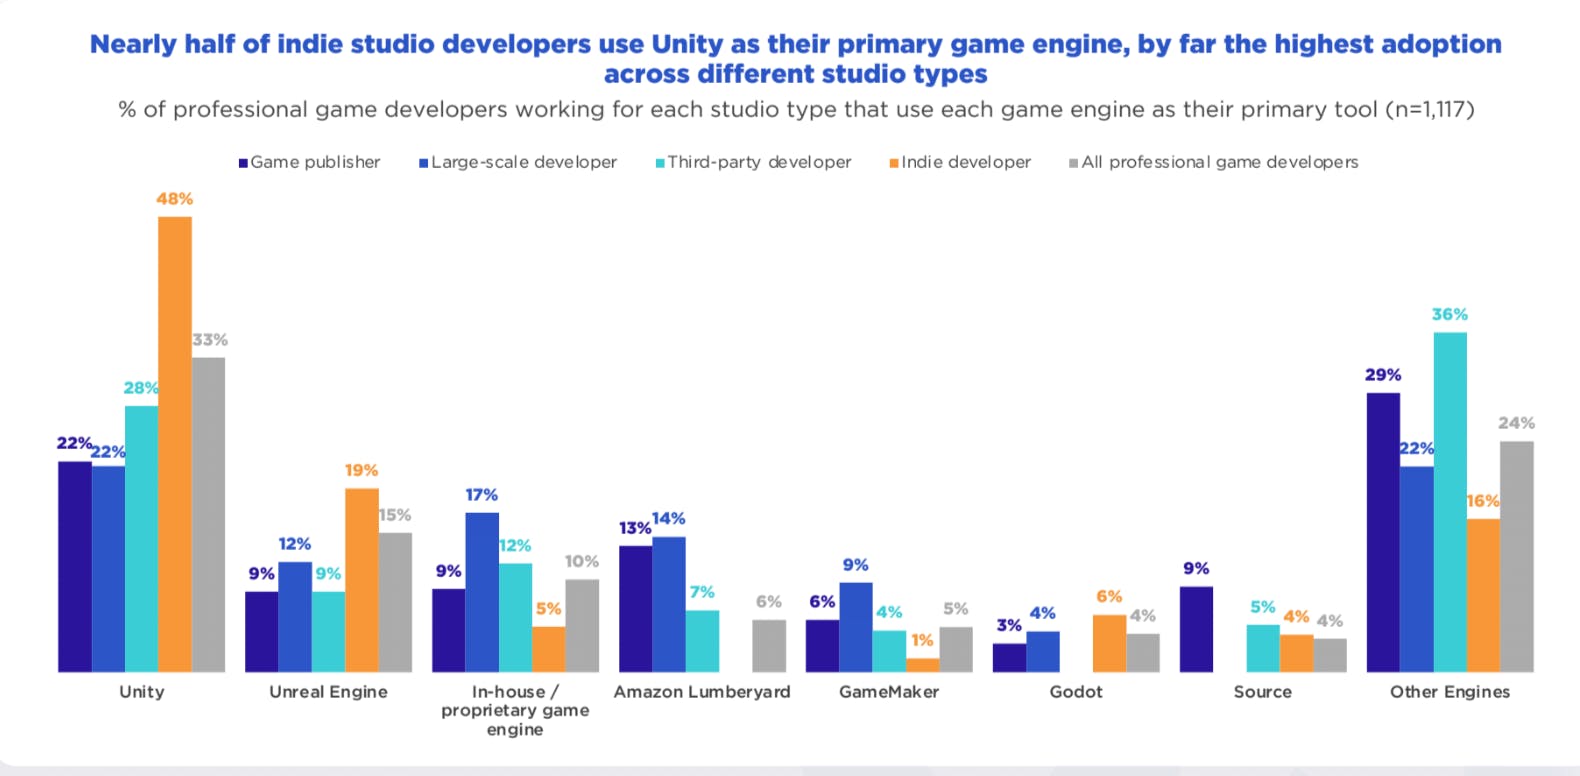 Why do indie devs use Unity?